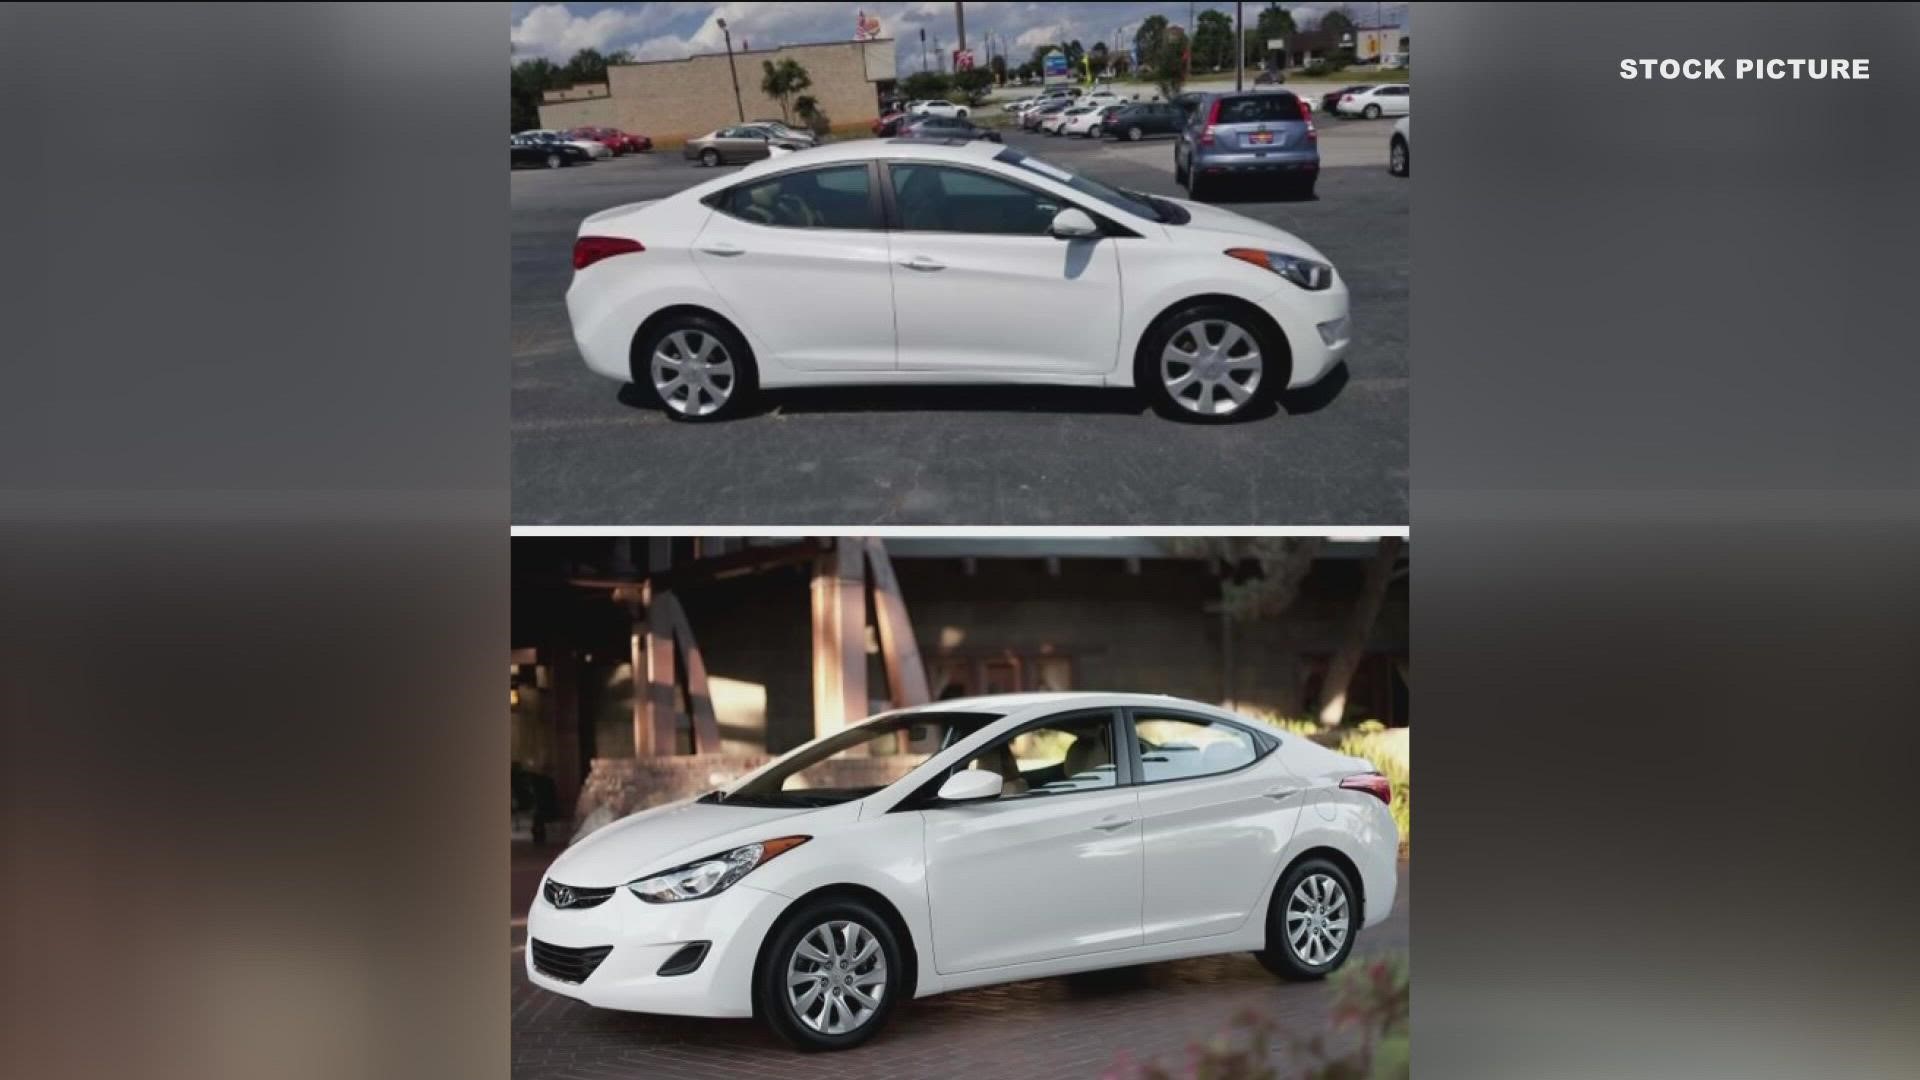 Police said they are still going through tips and looking for the owner of a white 2011-2013 Hyundai Elantra.